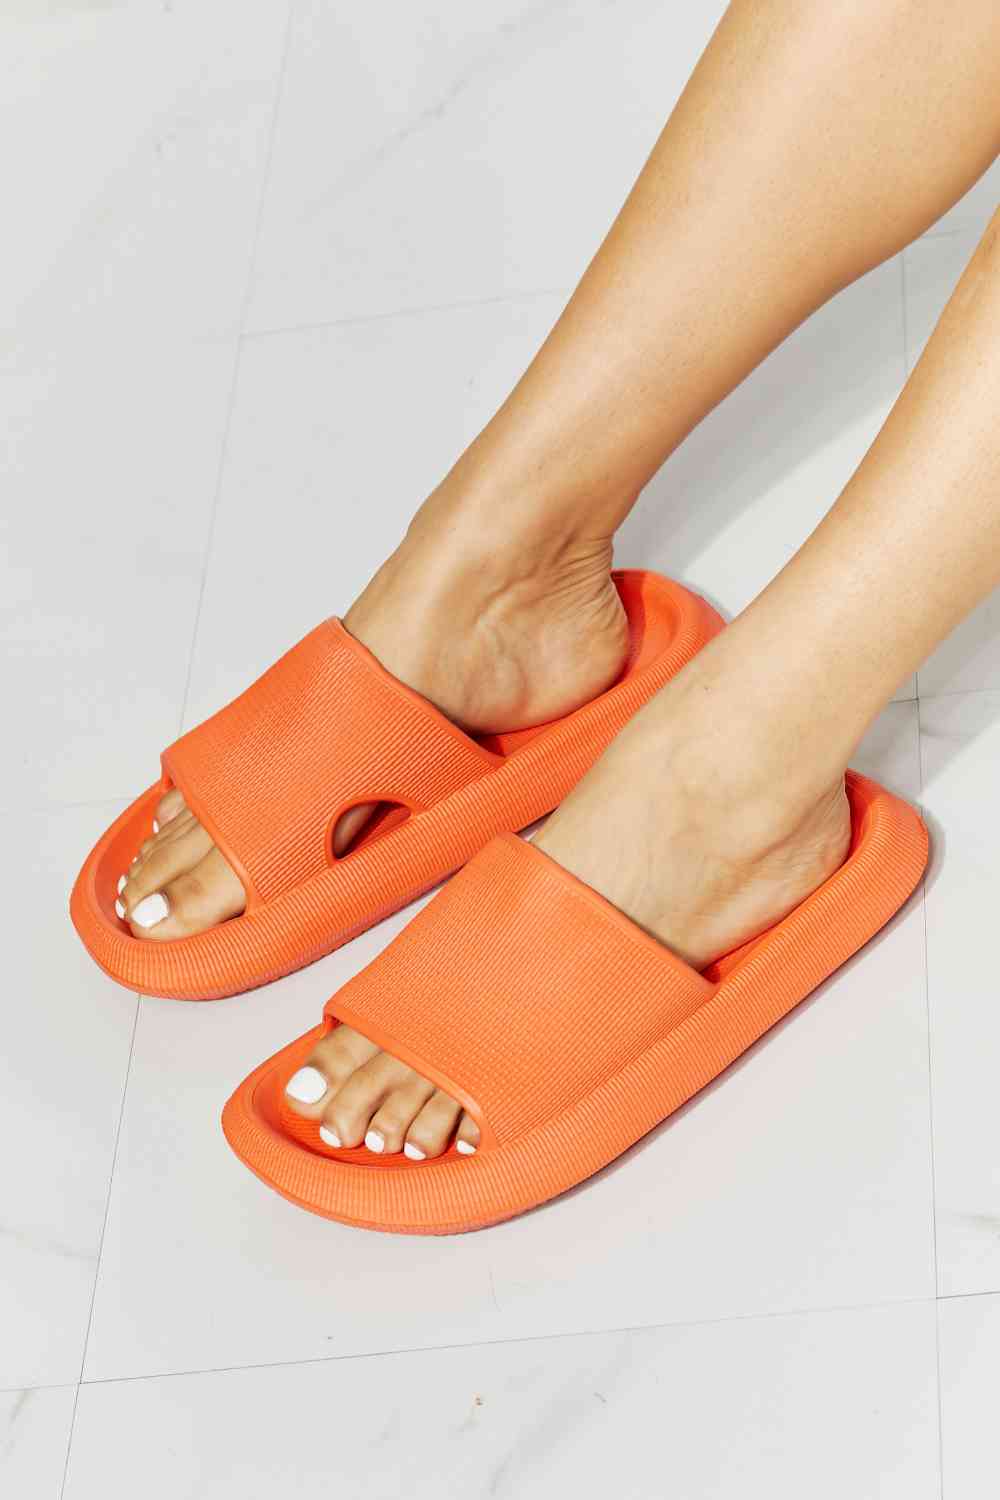 Arms Around Me Open Toe Slide in Orange - Accessories - Shoes - 3 - 2024